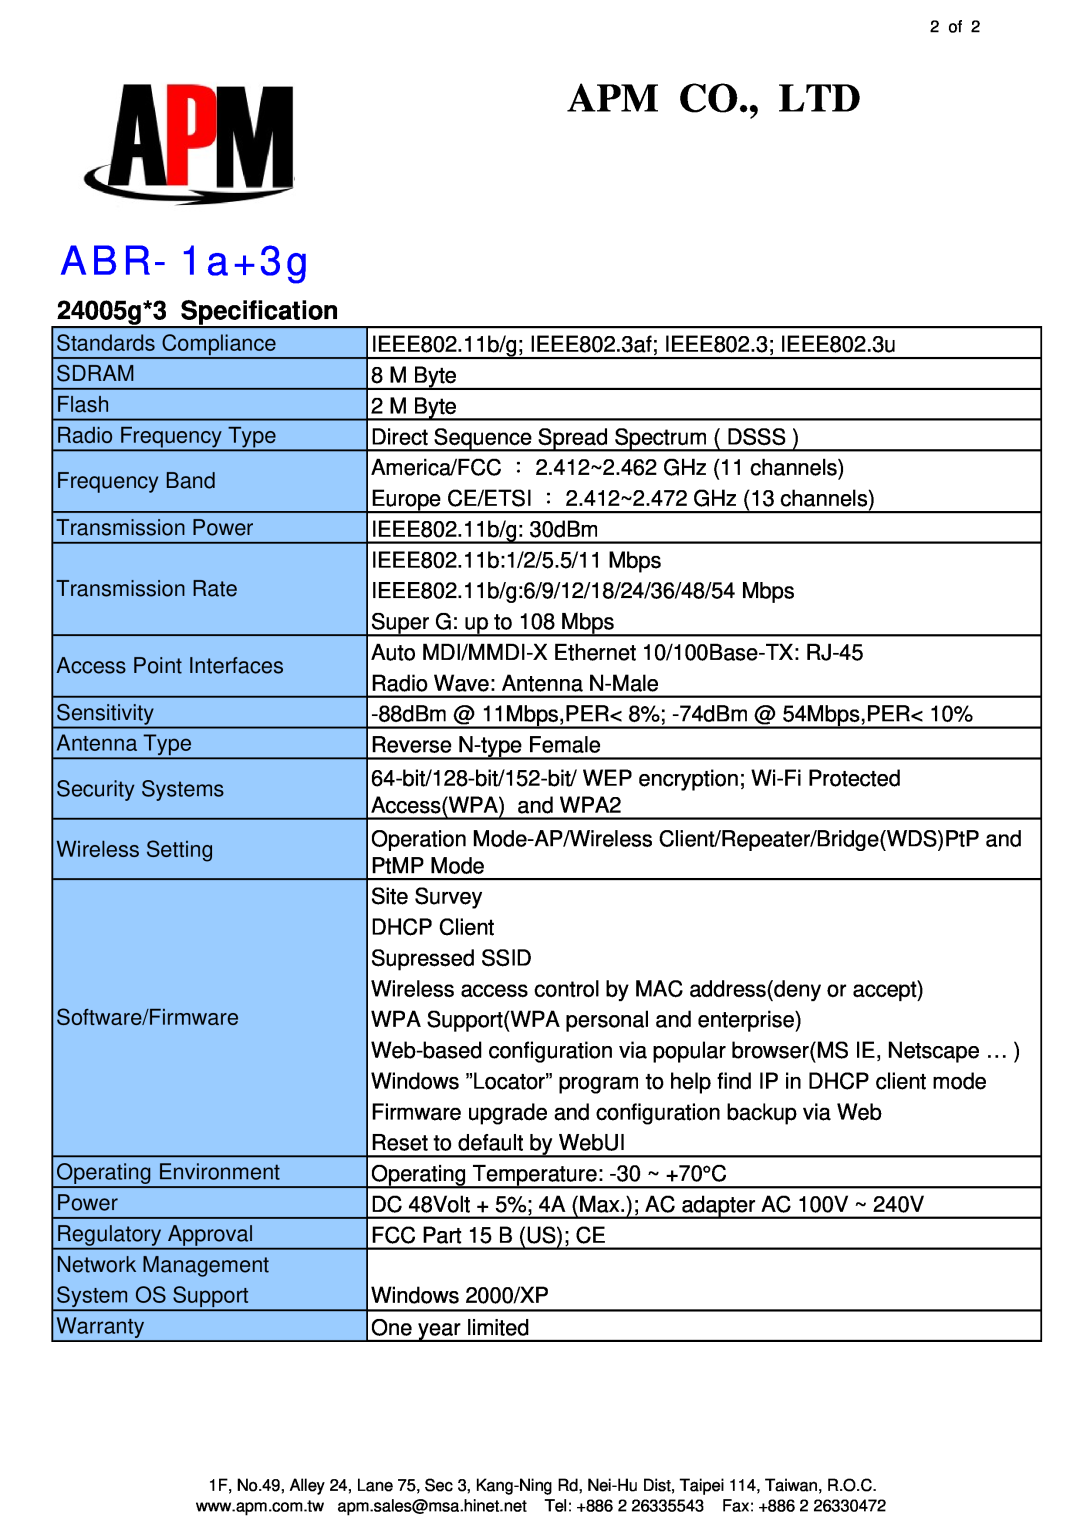 APM ABR-1A+3G warranty 24005g*3 Specification, ABR- 1a+3g, 2 of 